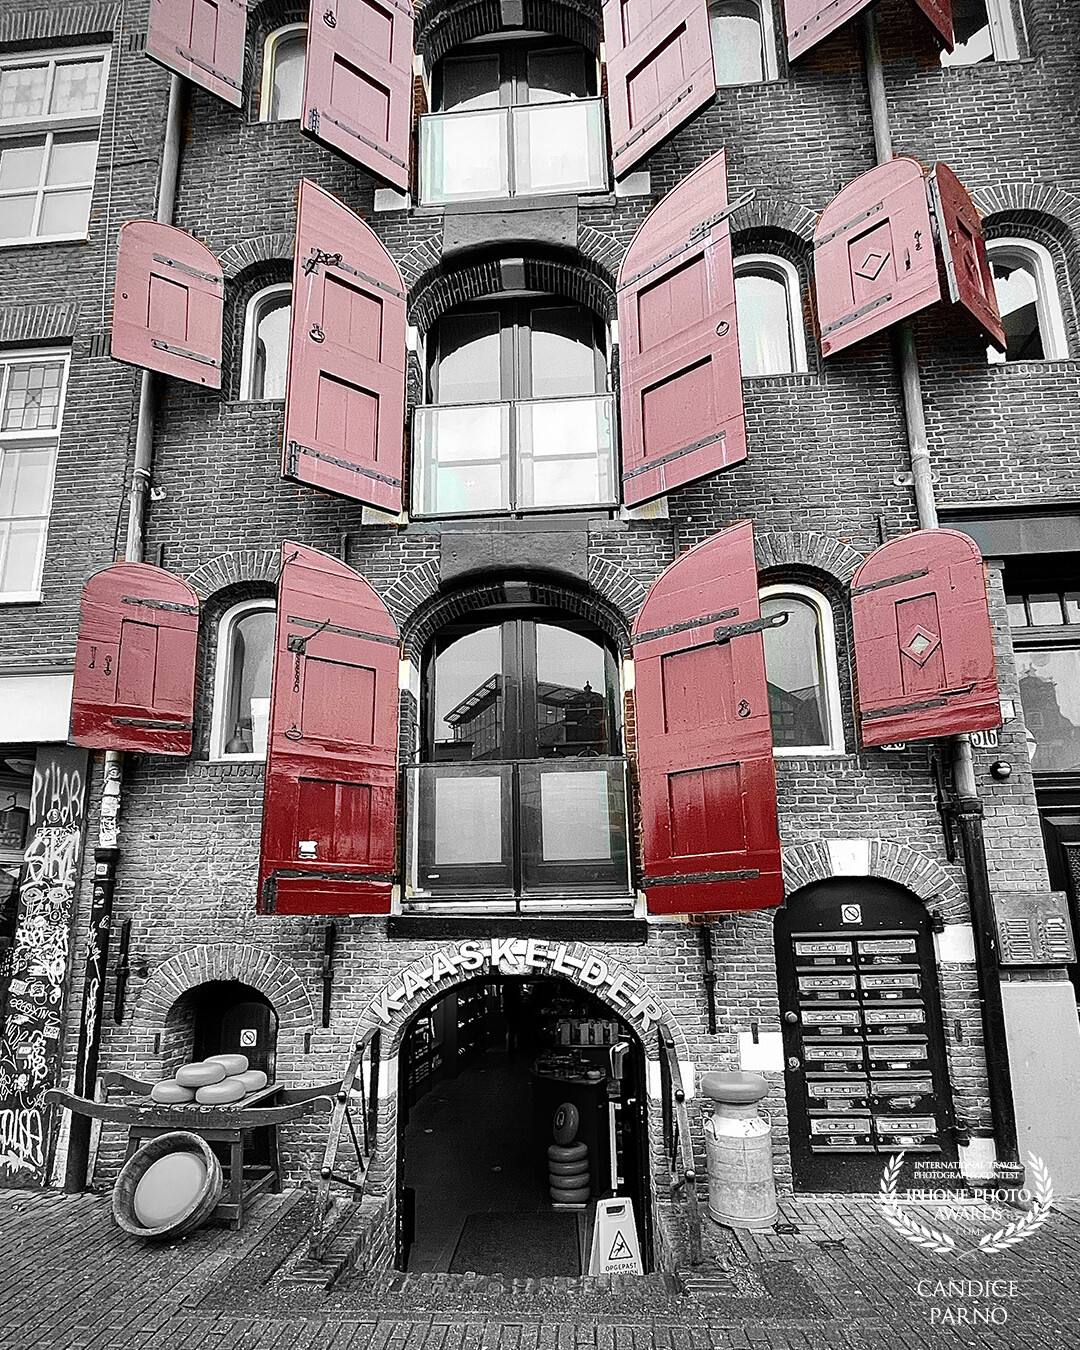 The wonderful red shutters of this building screamed to be displayed as a Color splash.